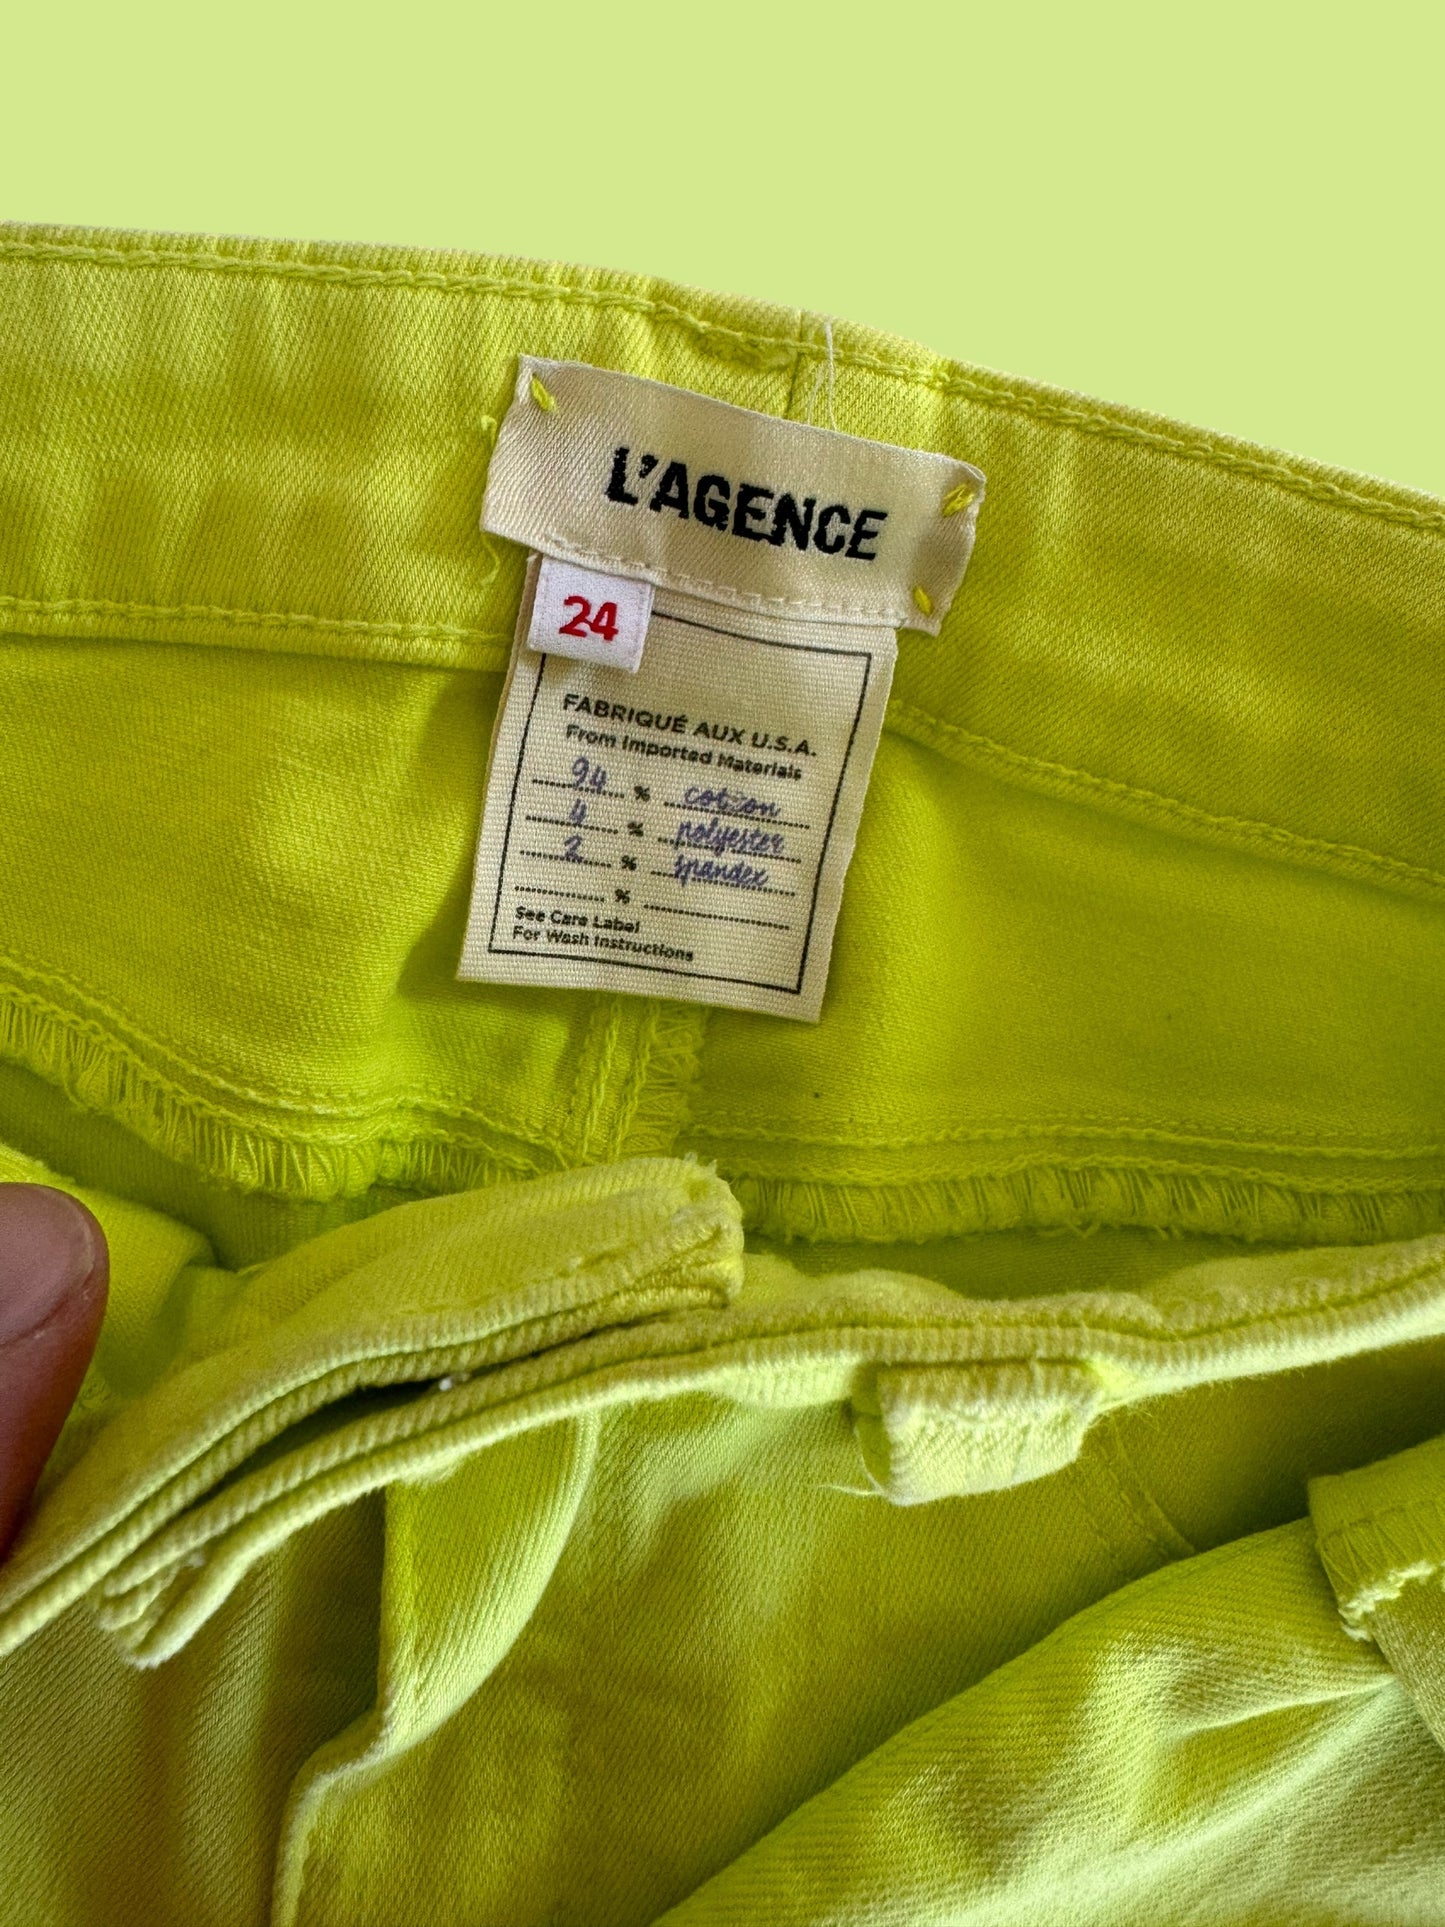 L’AGENCE yellow jeans size 24